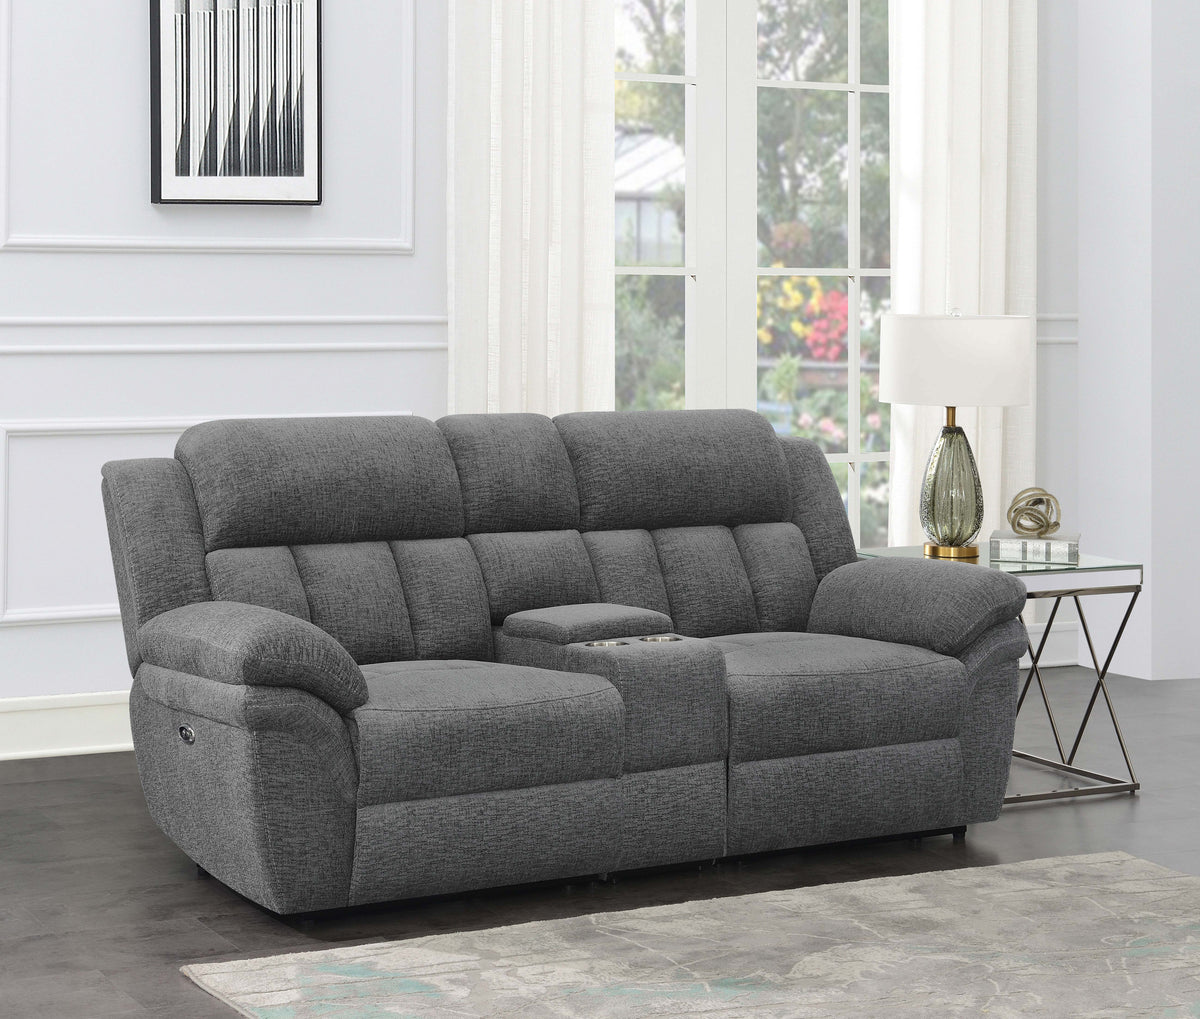 Bahrain Upholstered Power Loveseat with Console Charcoal Bahrain Upholstered Power Loveseat with Console Charcoal Half Price Furniture